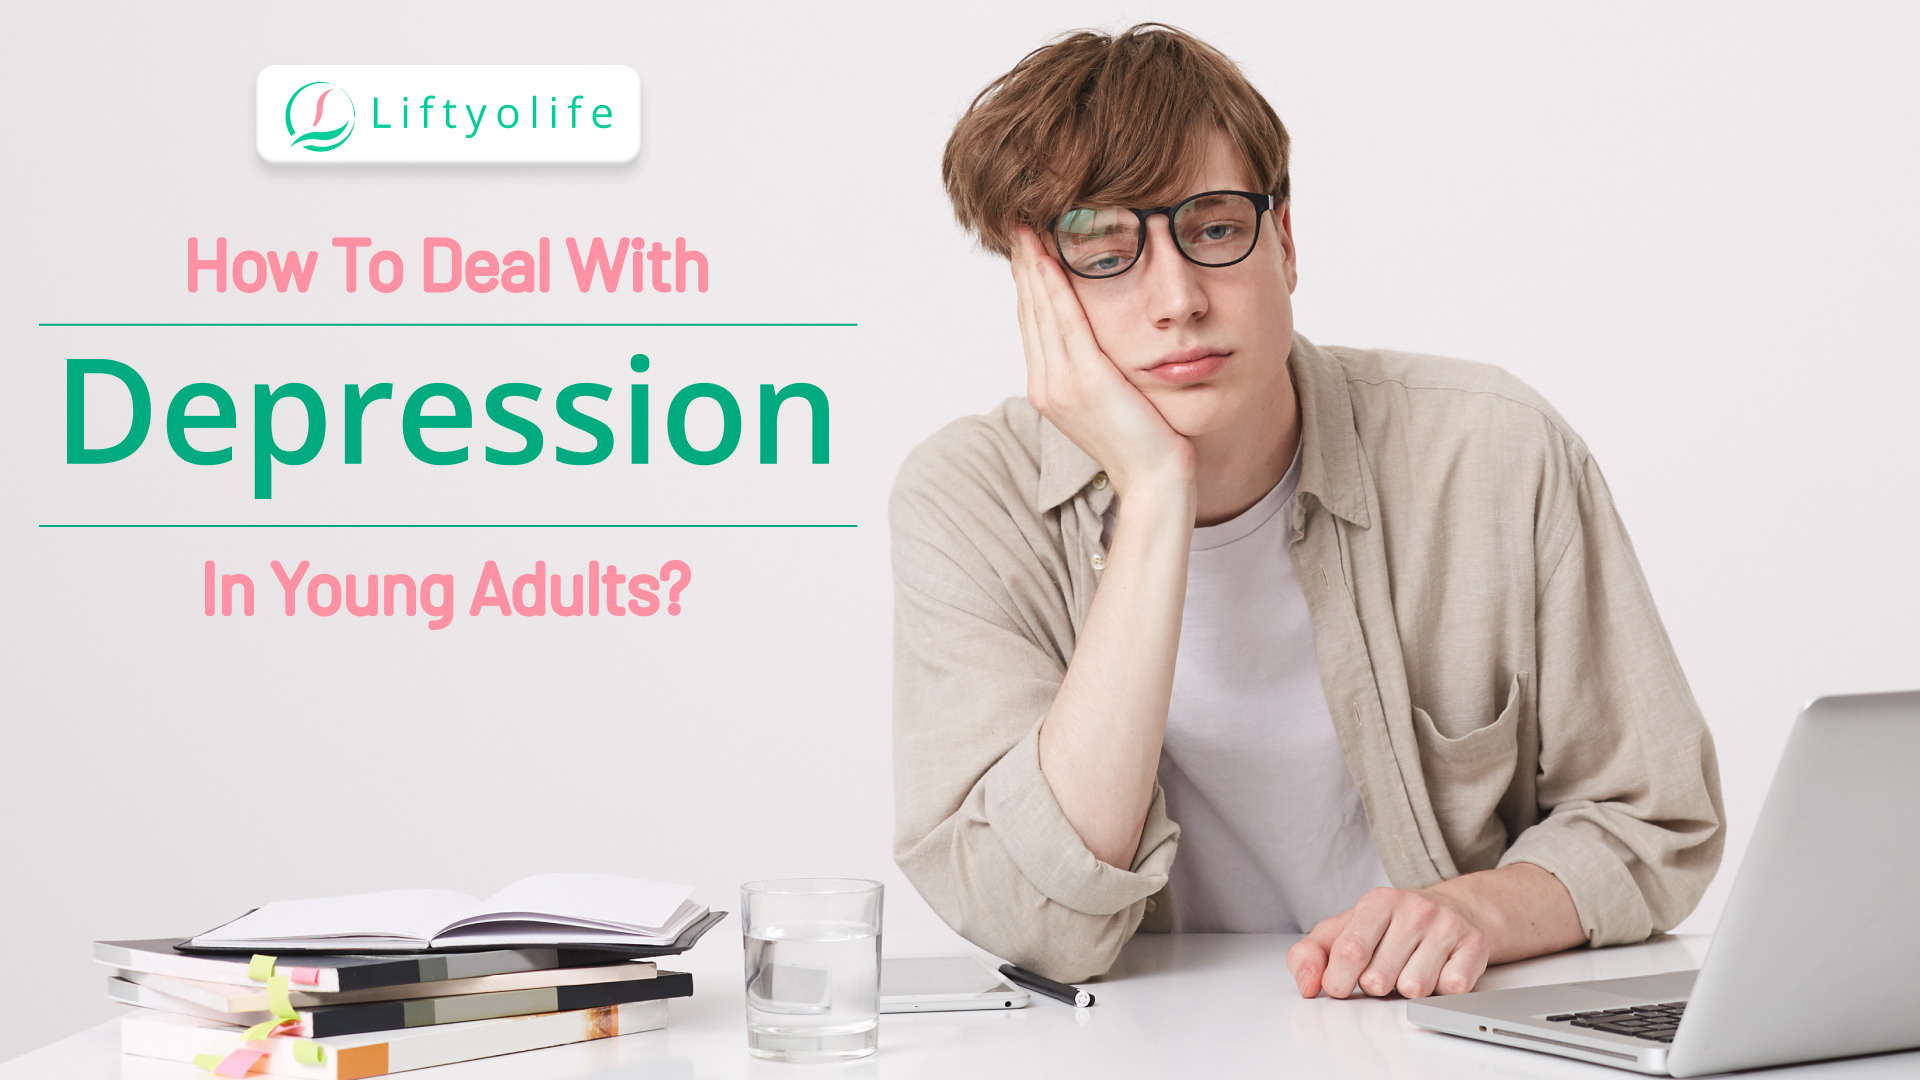 Depression In Young Adults – How To Deal?